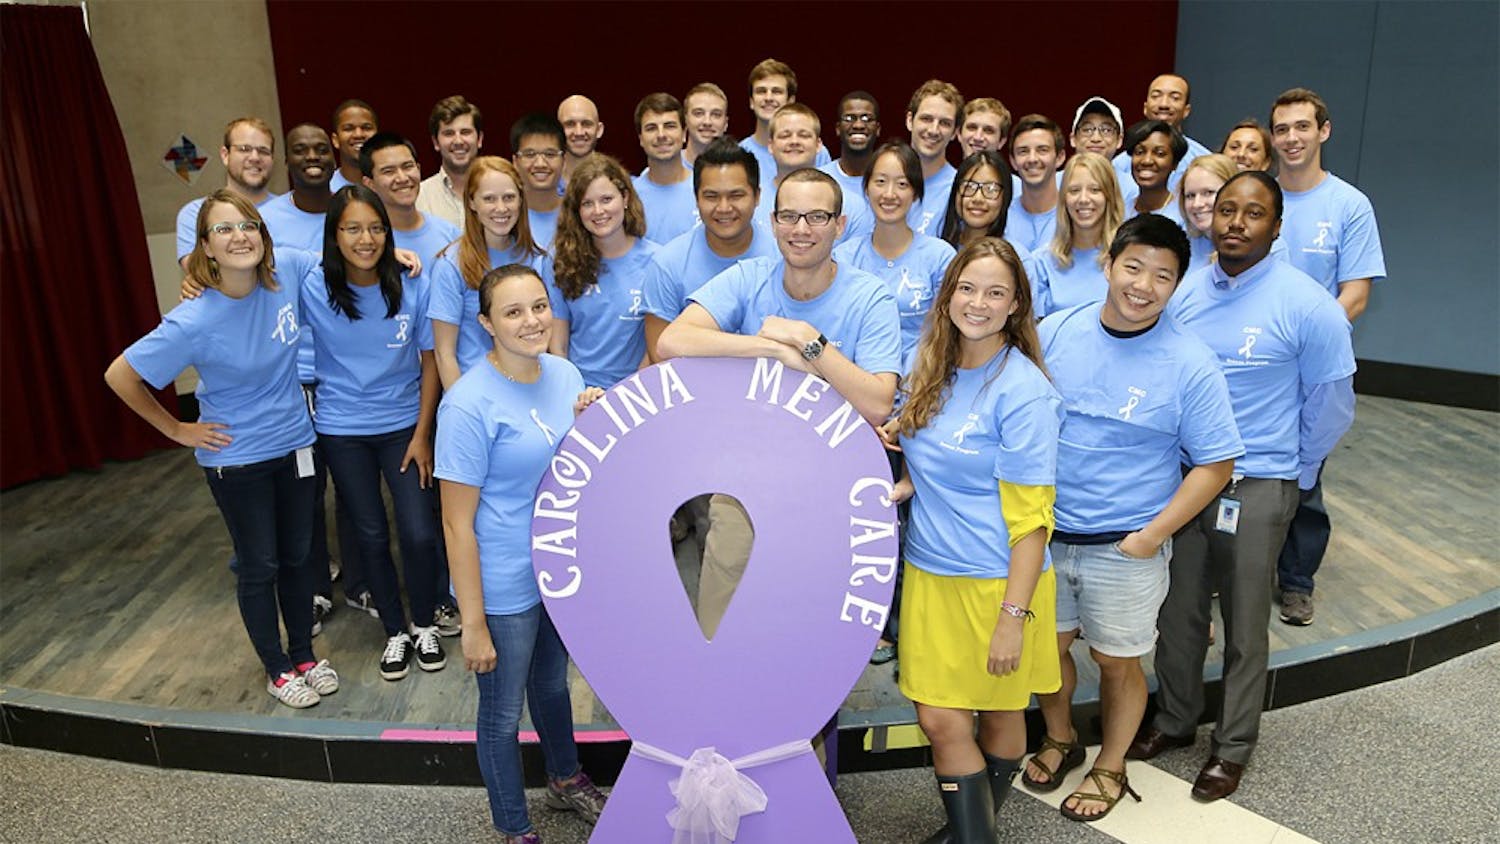 UNC School of Medicine students show their support for Carolina Men Care and its mission to increase the discussion on interpersonal violence. Courtesy of Graham Mulvaney.